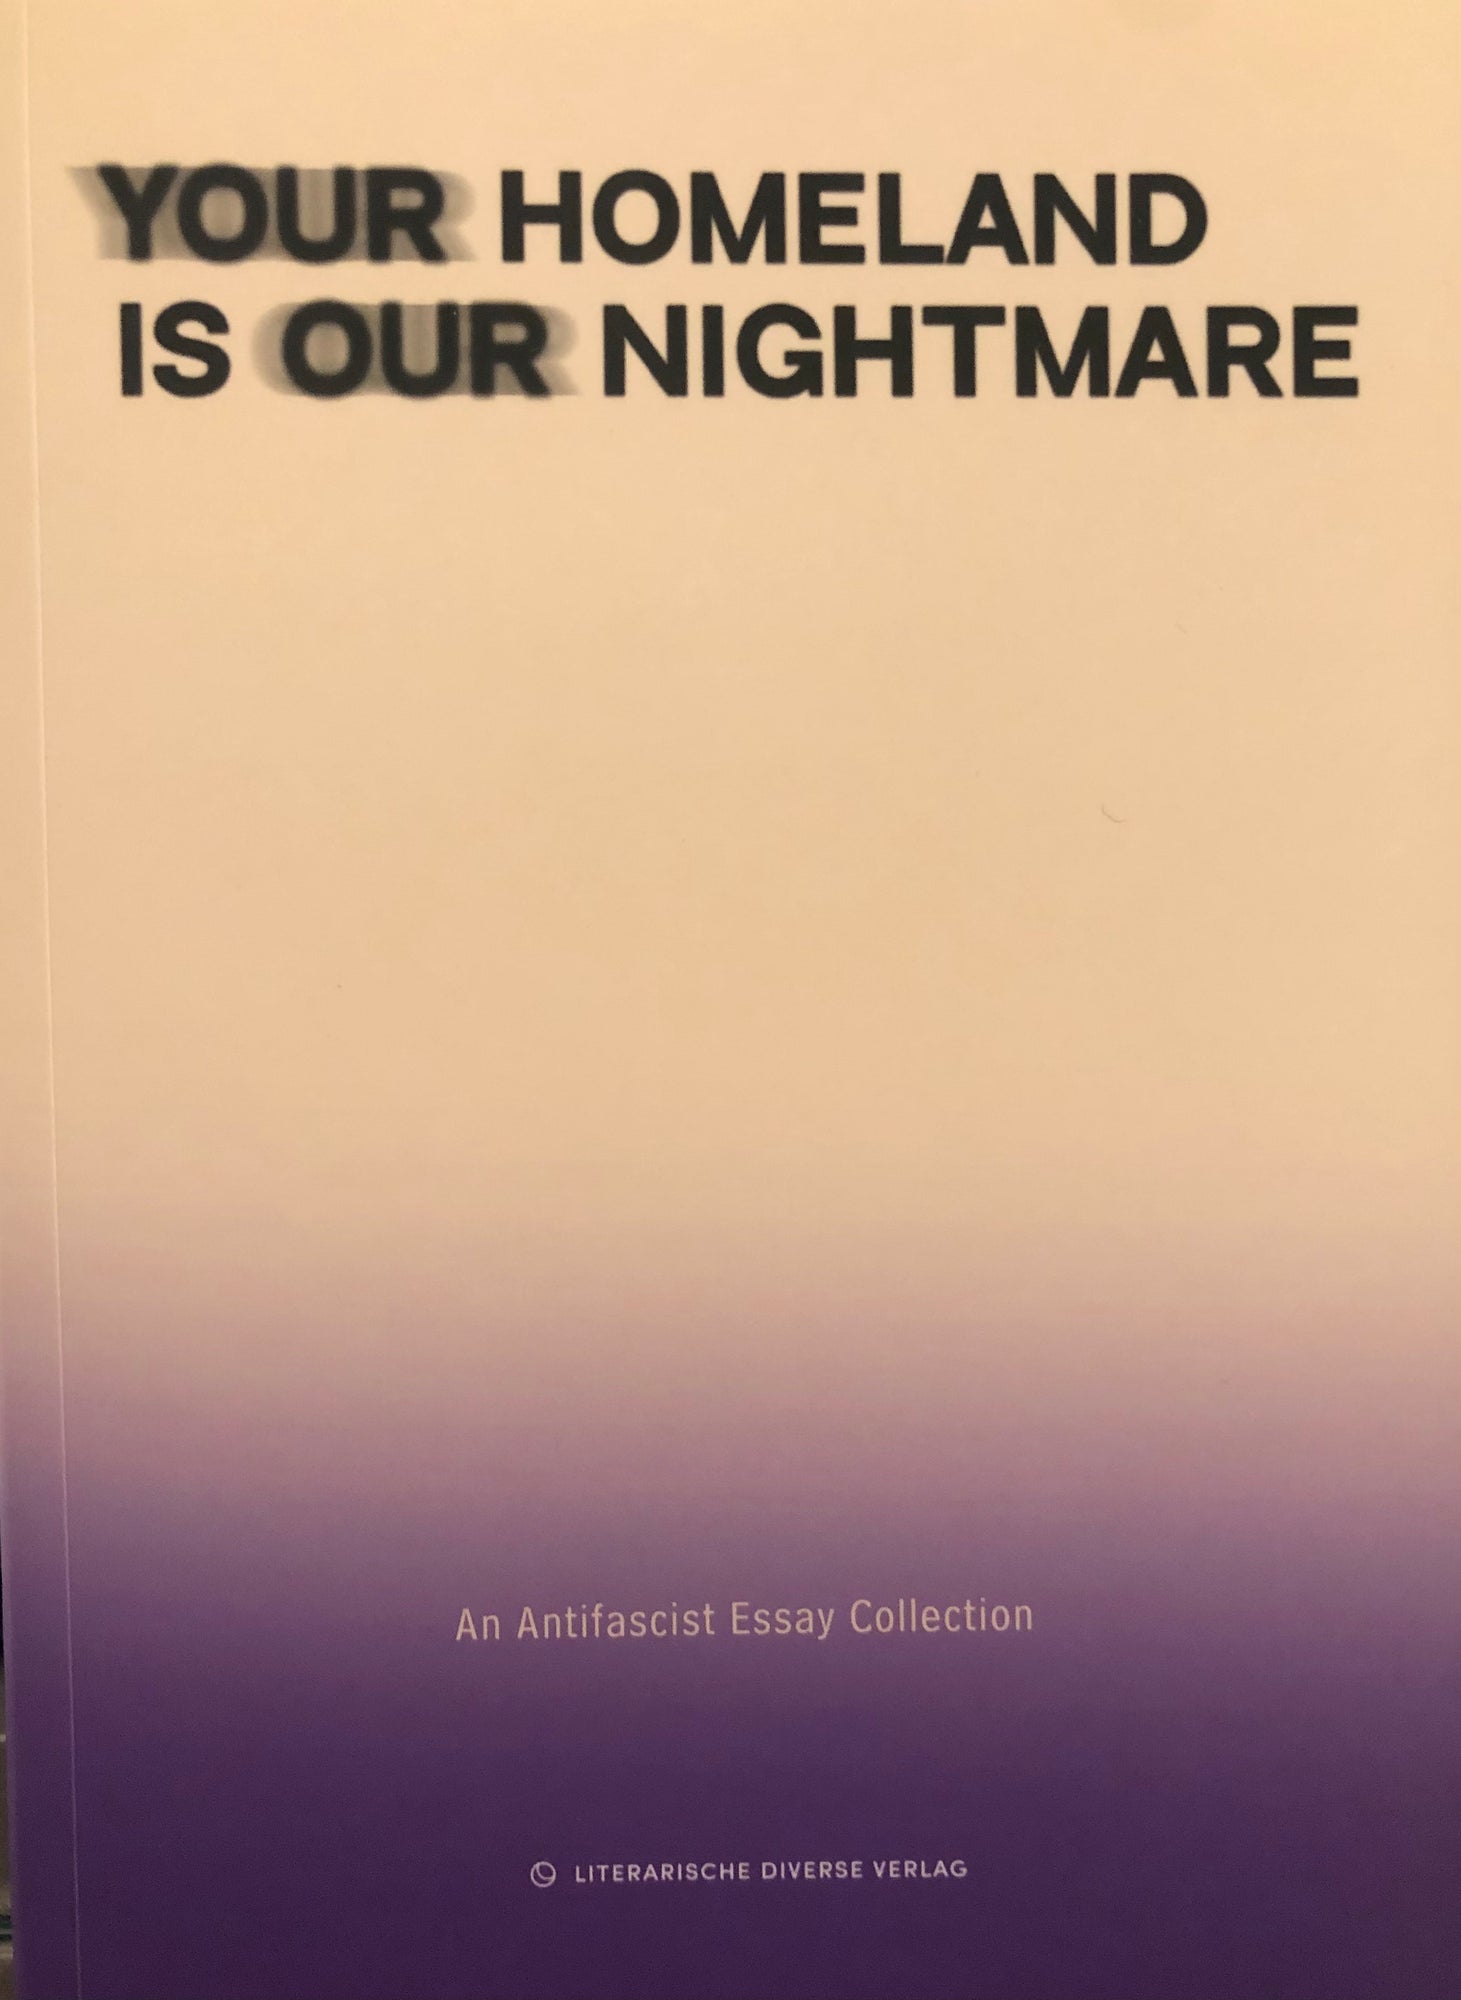 Your Homeland Is Our Nightmare — An Antifascist Essay Collection